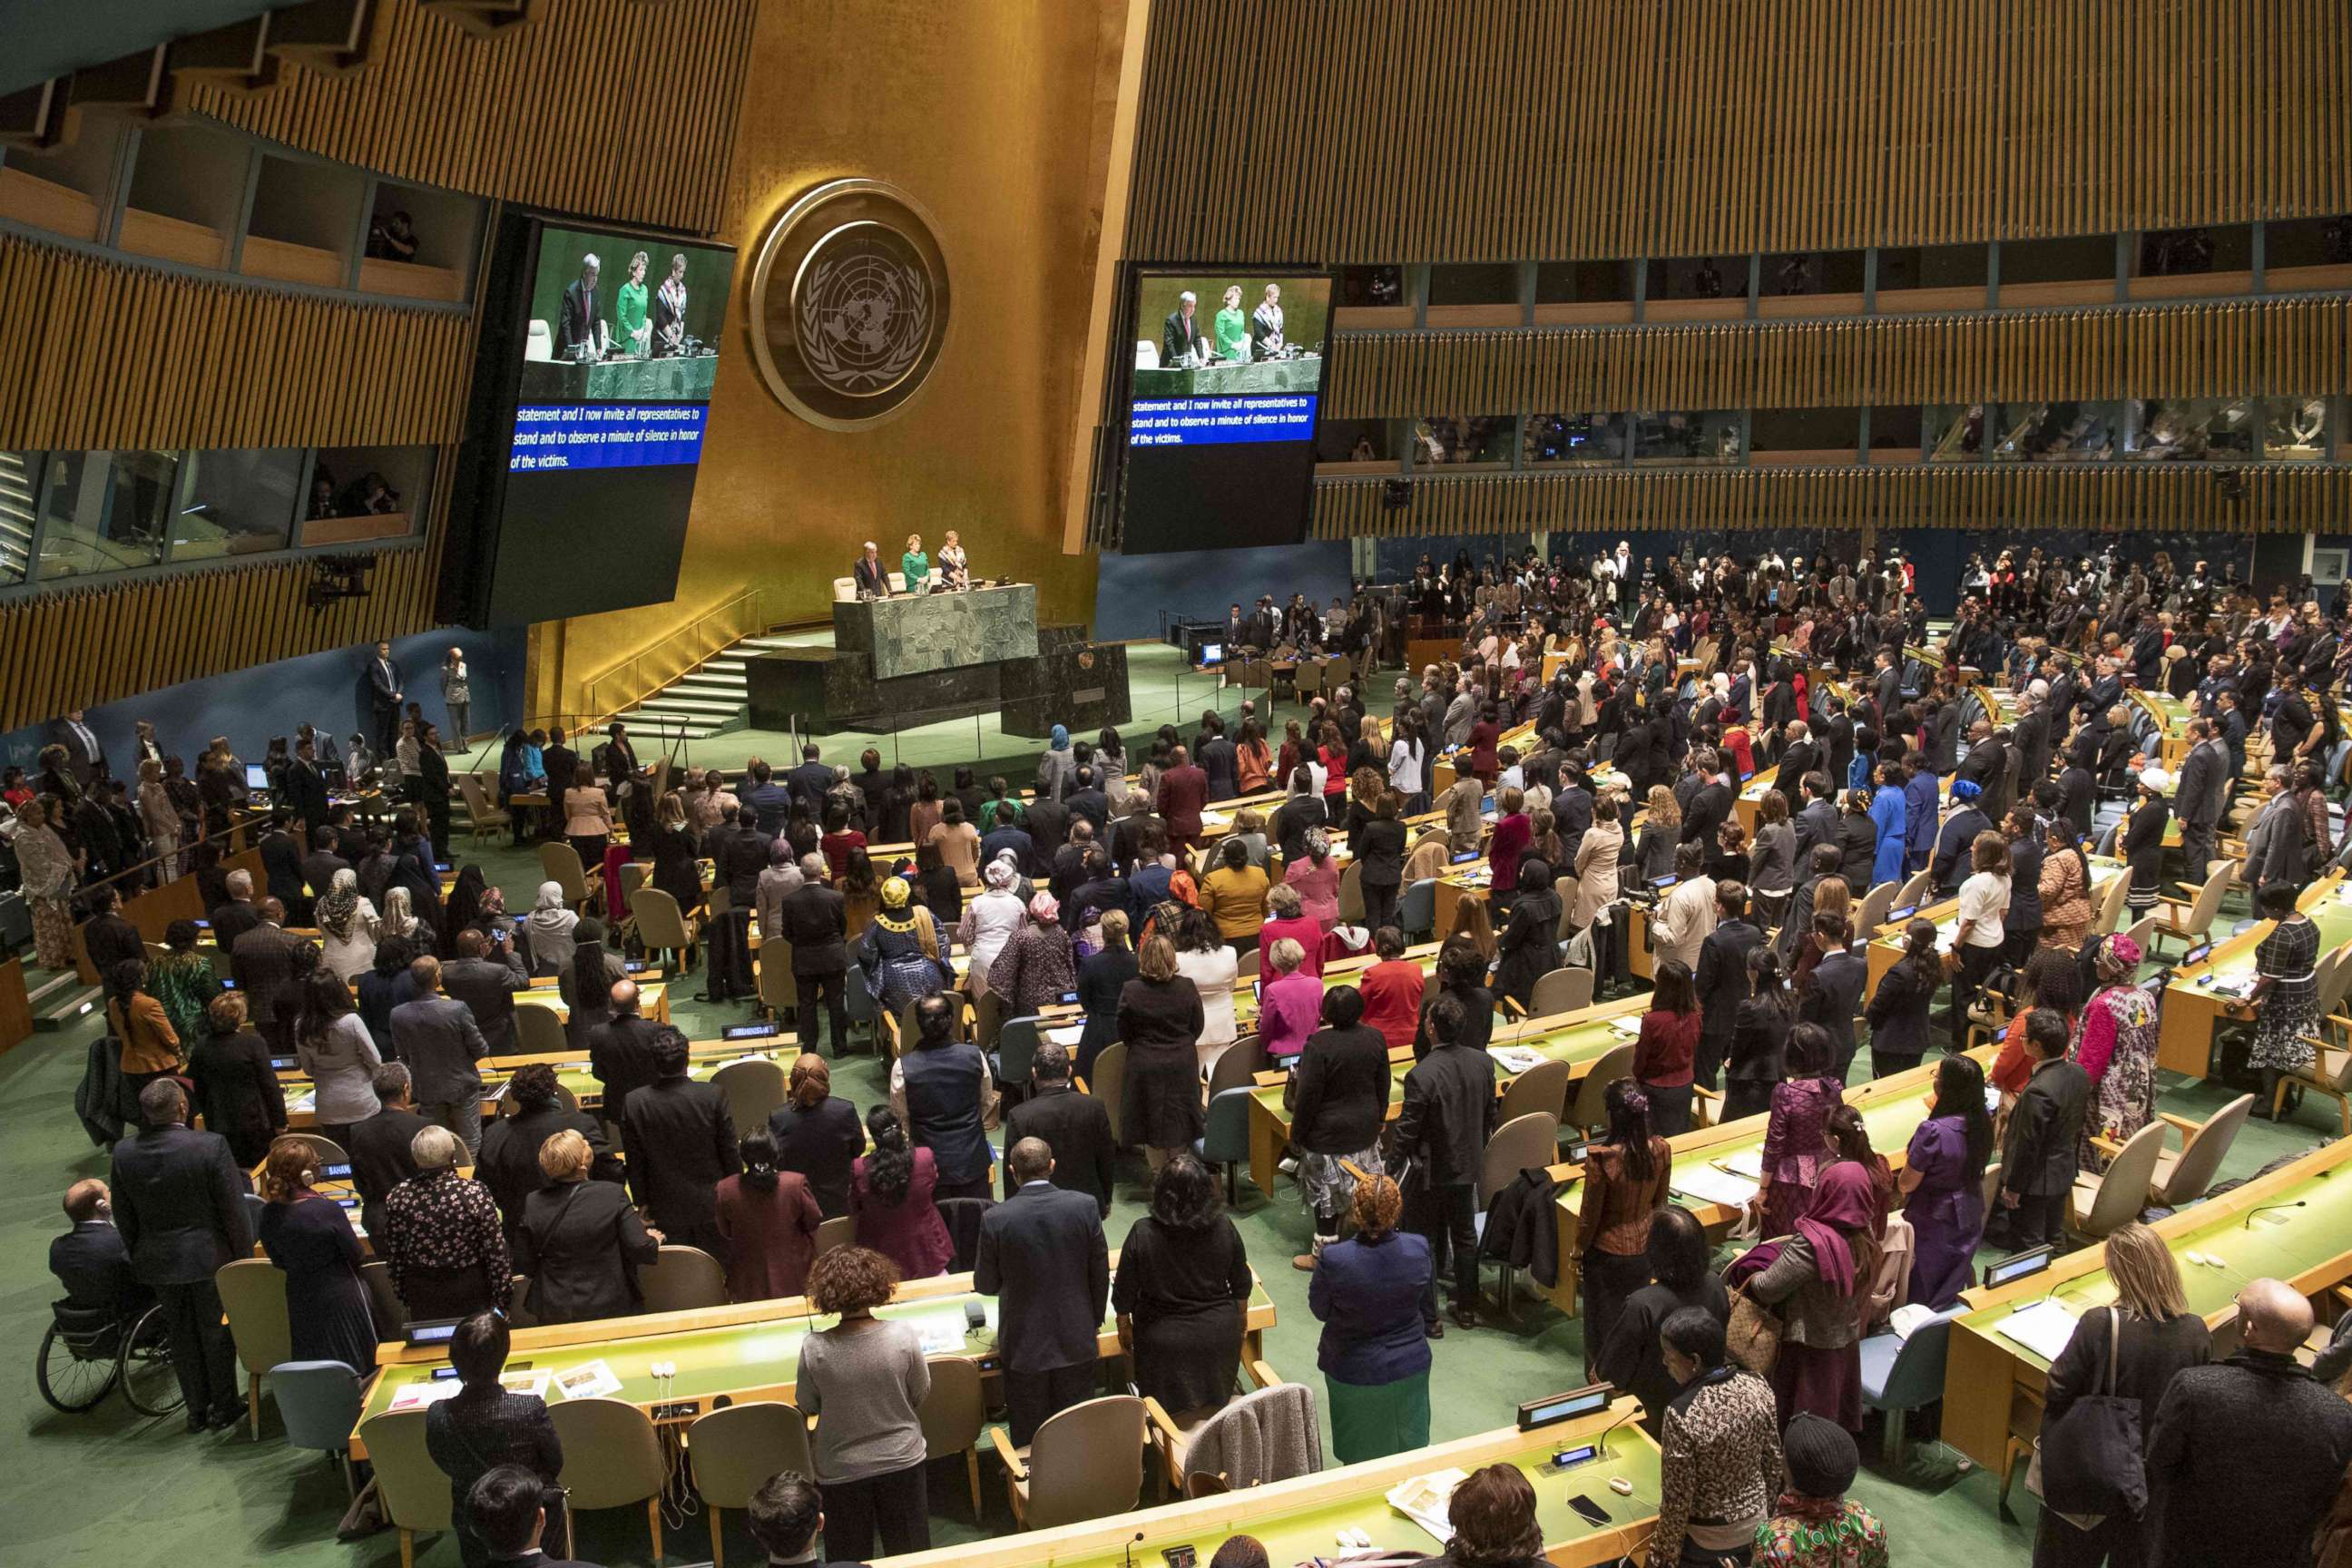 PHOTO: At the opening meeting of the Commission on the Status of Women (CSW) 63rd session, March 11, 2019, participants observe a moment of silence for those who lost their lives in the crash of Ethiopian Airlines flight ET302, March 10, 2019.